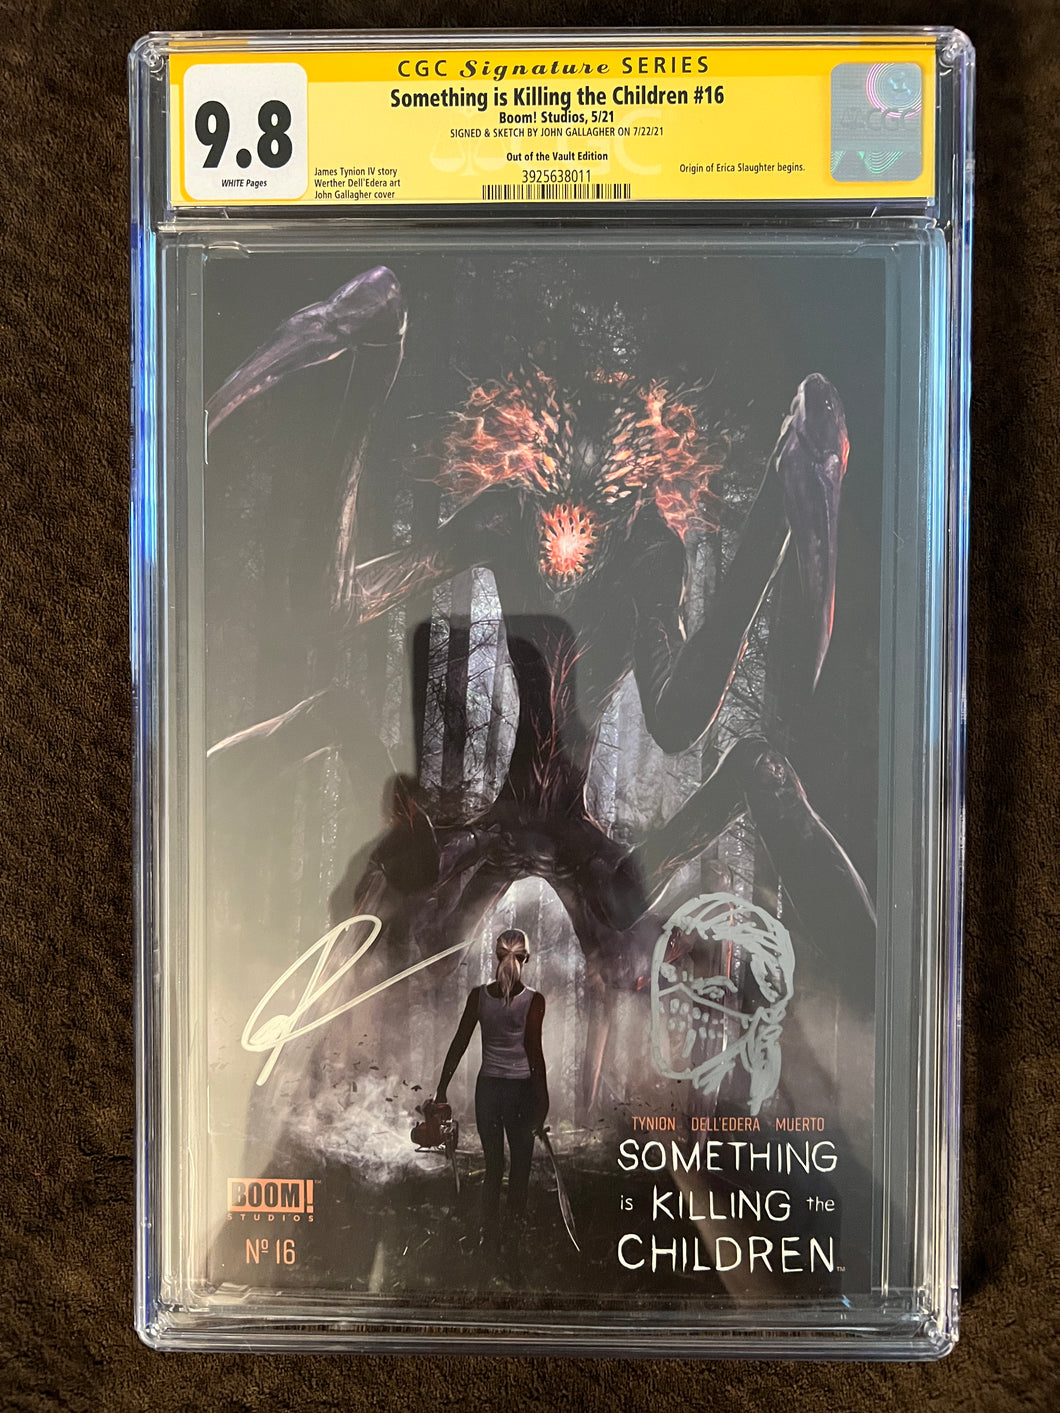 Something is Killing the Children #16 Exclusive John Gallagher Variant CGC 9.8 w/ Remarque